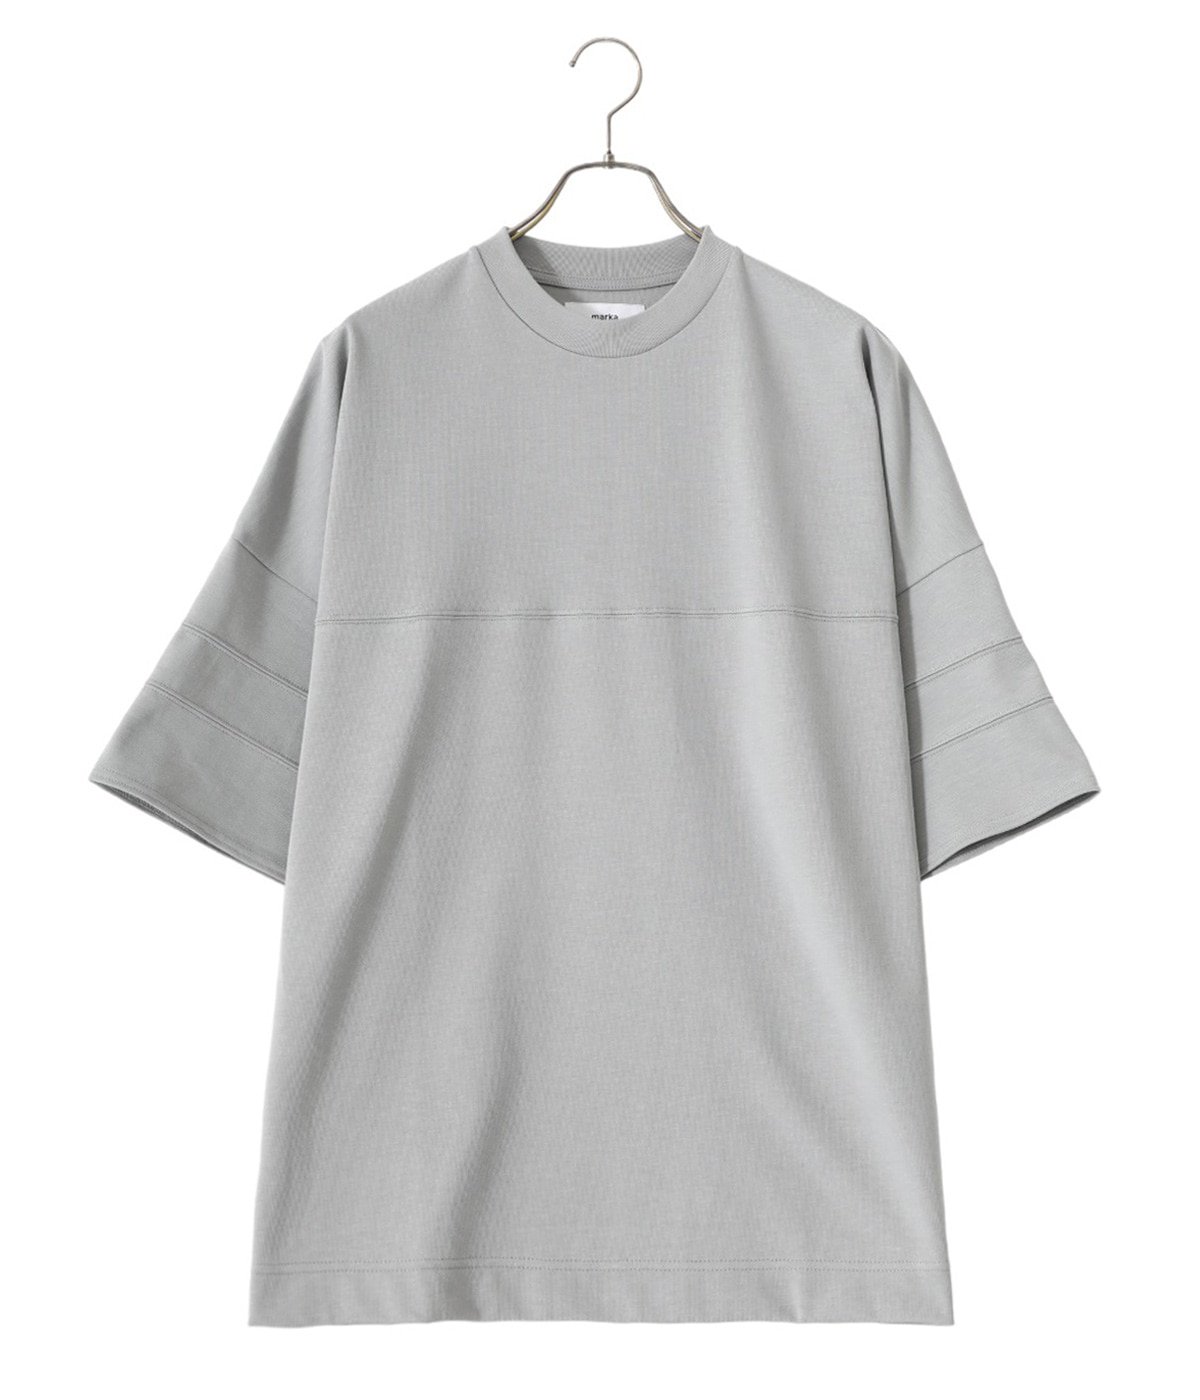 FOOTBALL TEE WIDE | marka(マーカ) / トップス カットソー半袖・T ...